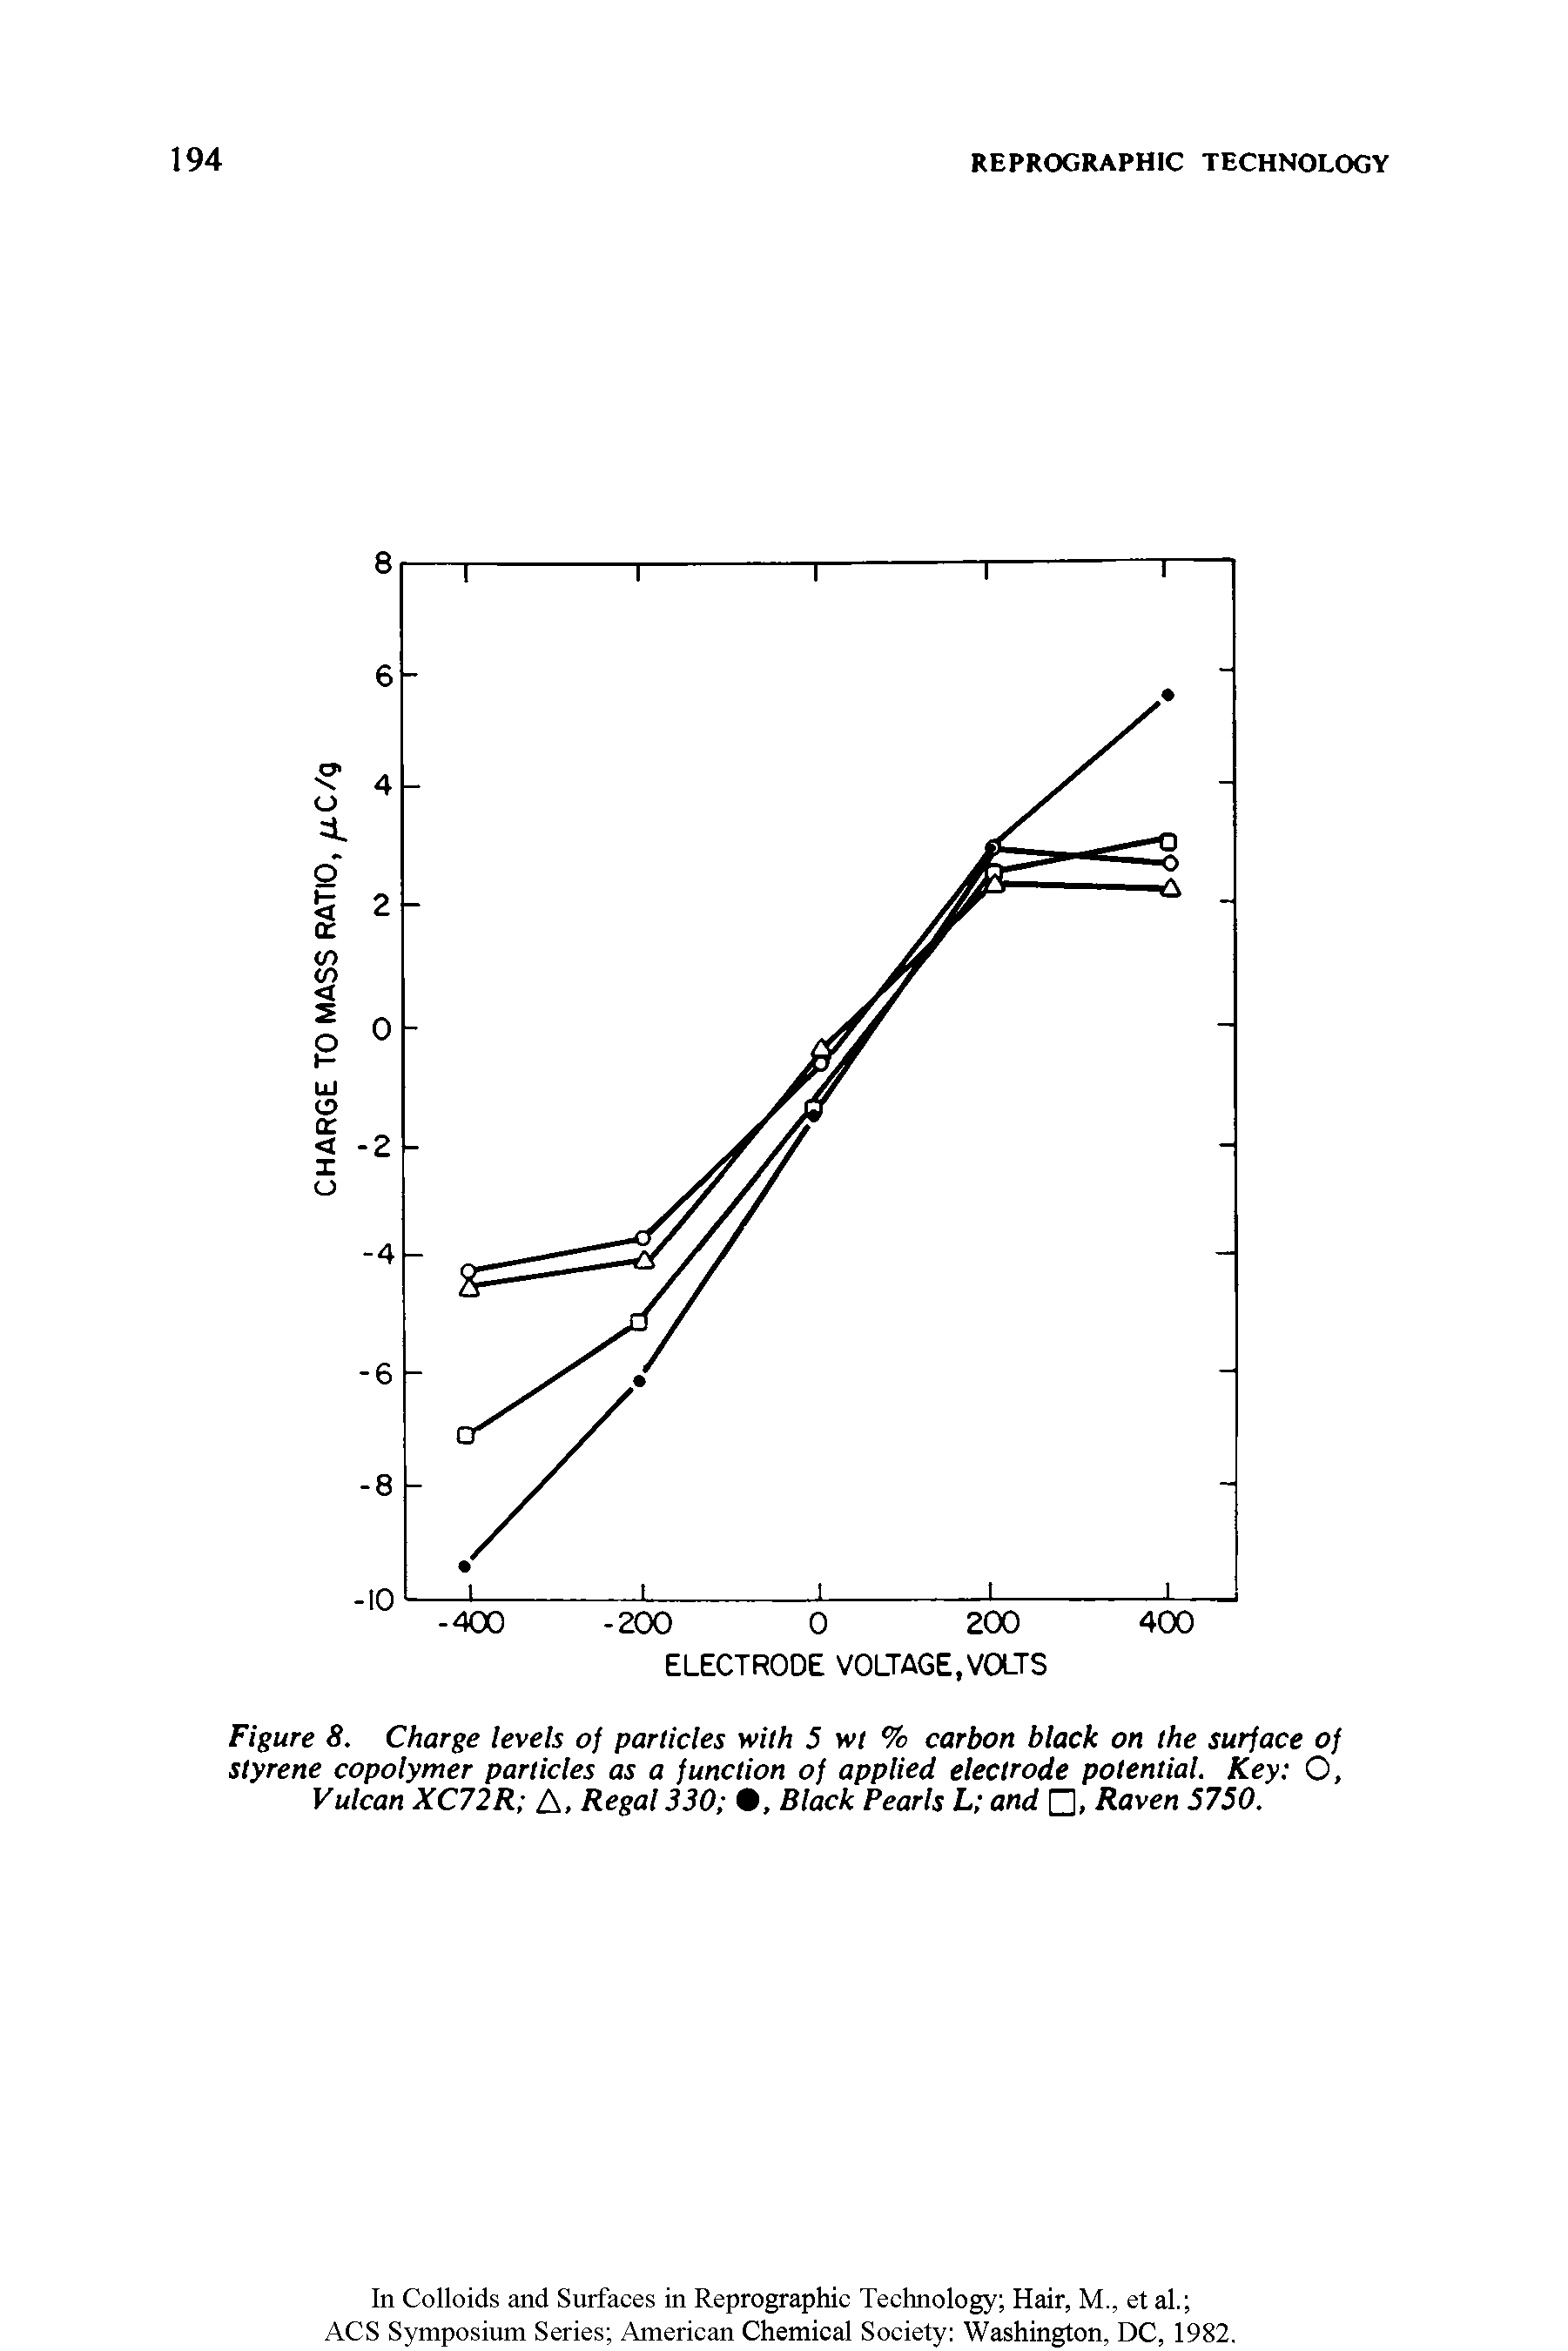 Figure 8. Charge levels of particles with 5 wt % carbon black on the surface of styrene copolymer particles as a function of applied electrode potential. Key O, Vulcan XC72R A, Regal 330 , Black Pearls L and , Raven 5750.